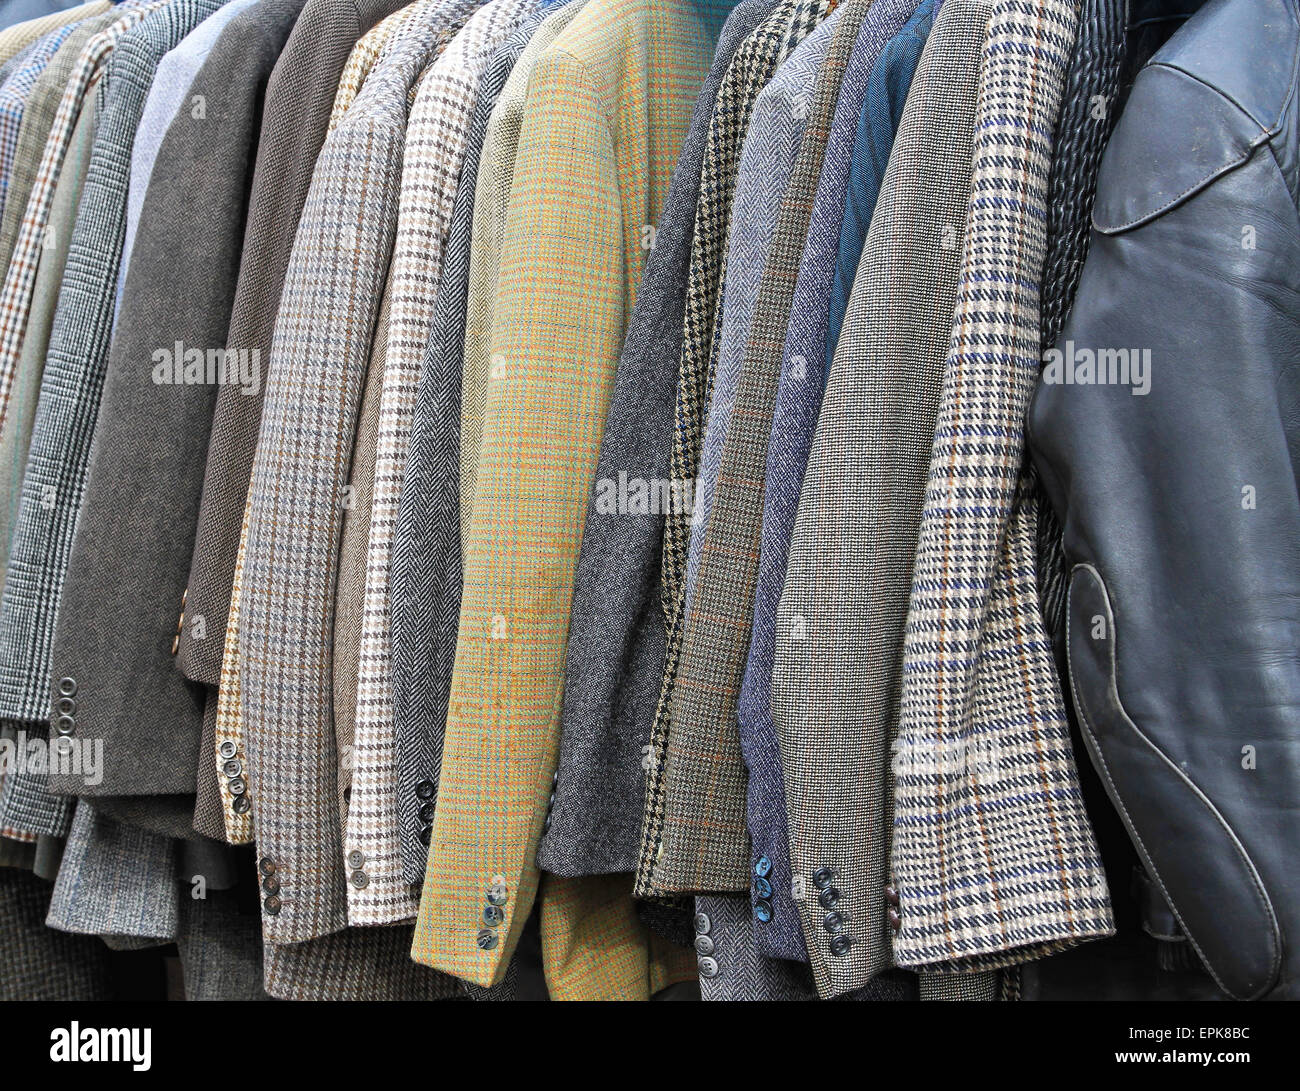 Suits and coats Stock Photo